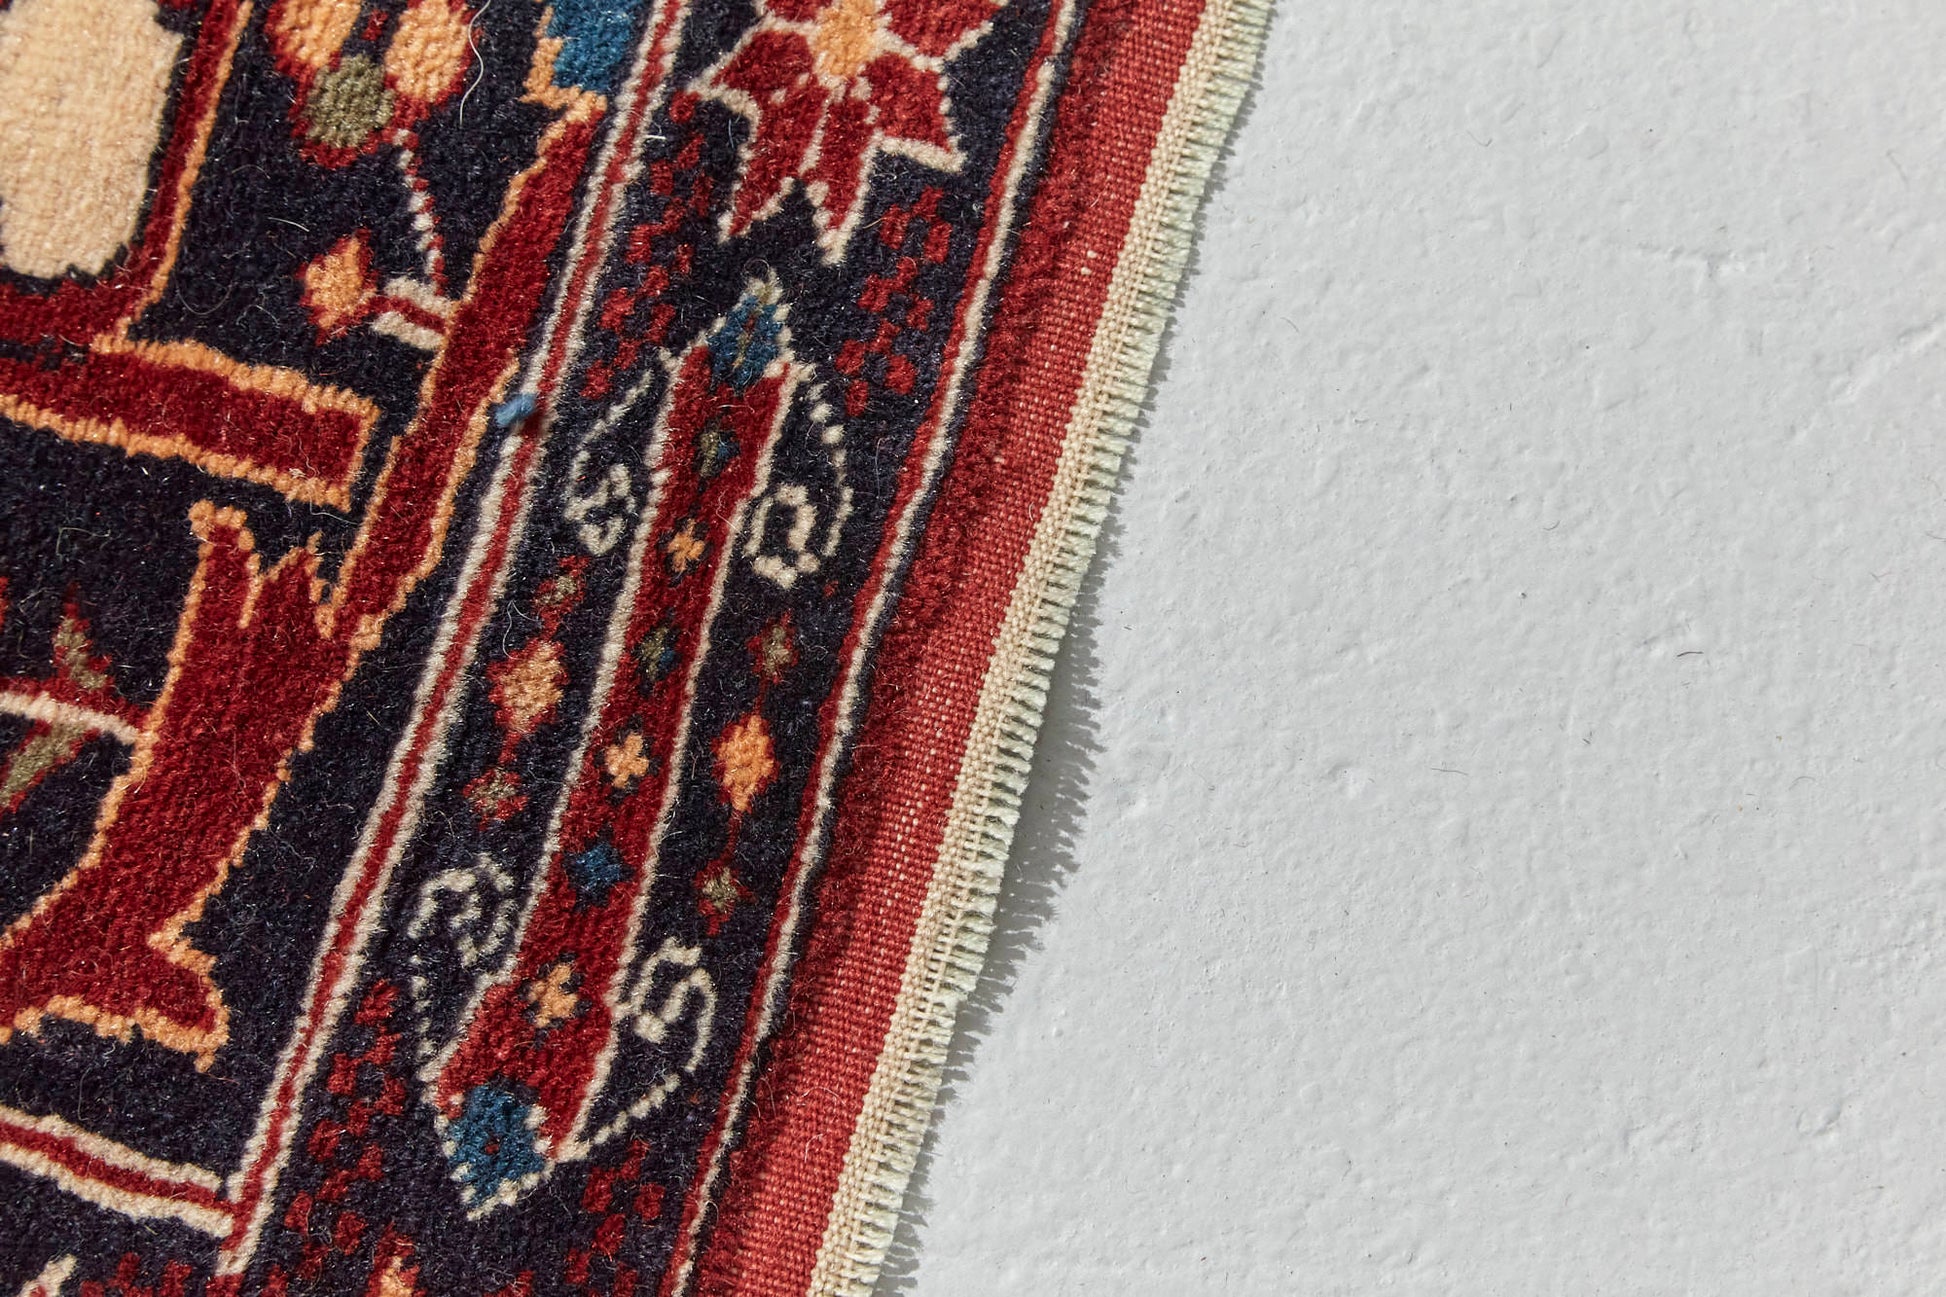 Border detail of Antique Bidjar Persian Rug Sampler, hand woven with dark blue base and red, cream, gold and lighter blue shapes, beautiful piece in excellent condition for a study, bedroom or foyer rug - Available from King Kennedy Rugs Los Angeles